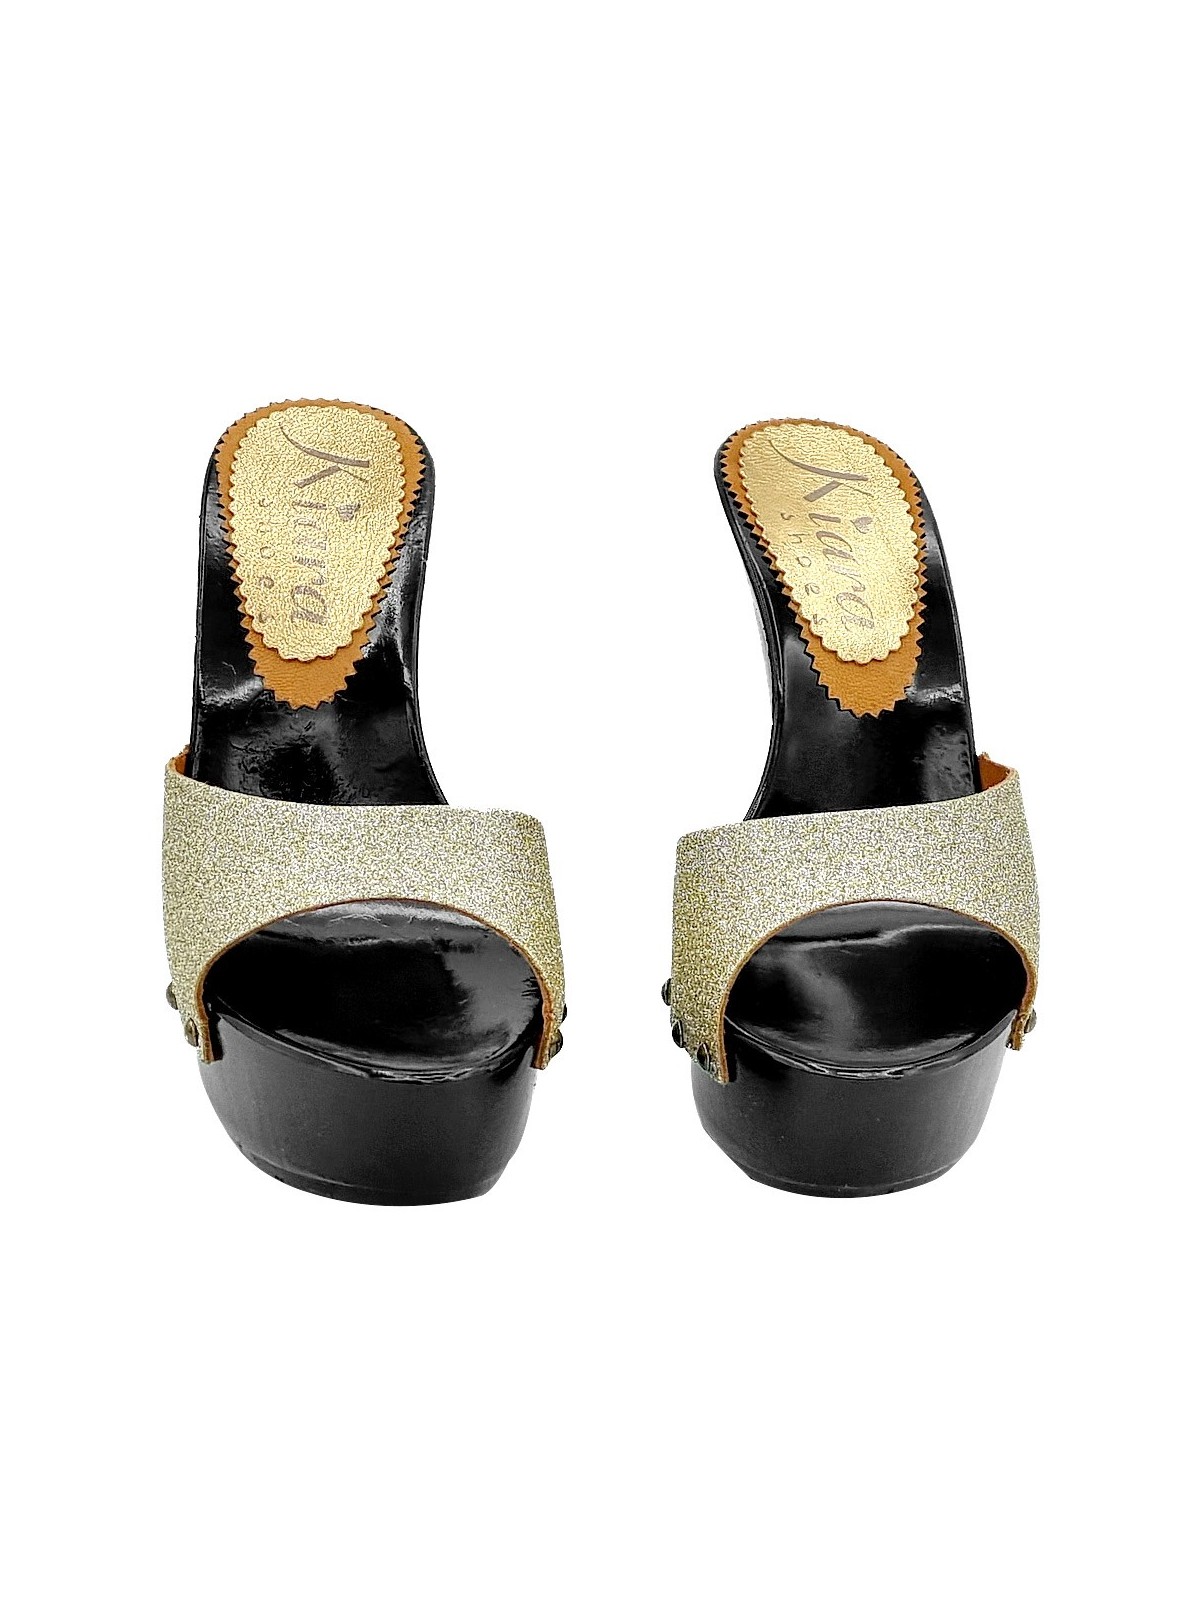 GOLD GLITTER CLOGS WITH HEEL 13